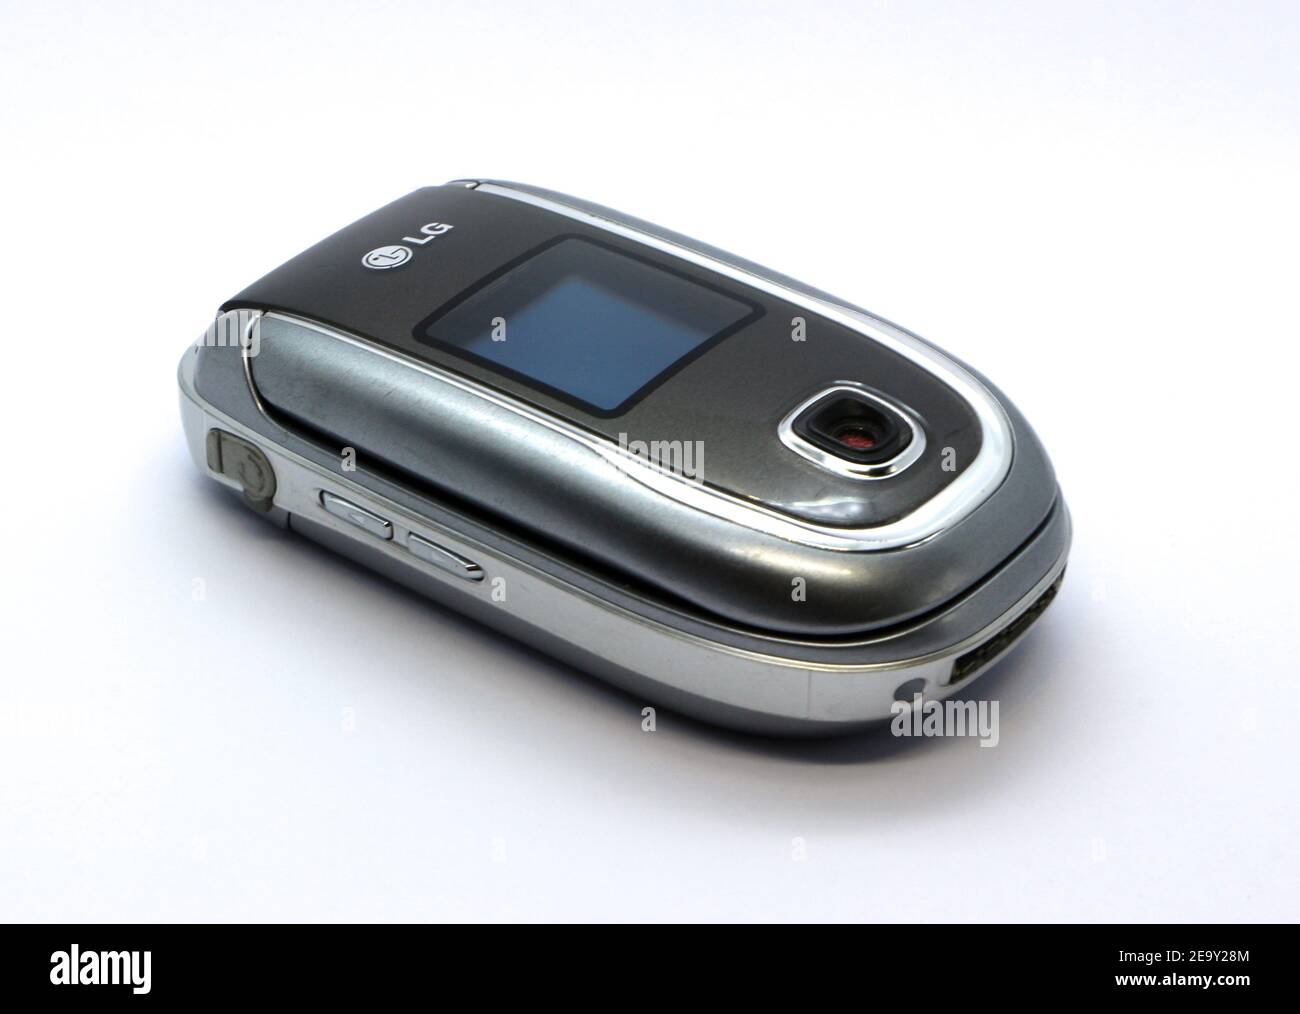 Page 2 Flip Phone High Resolution Stock Photography And Images Alamy